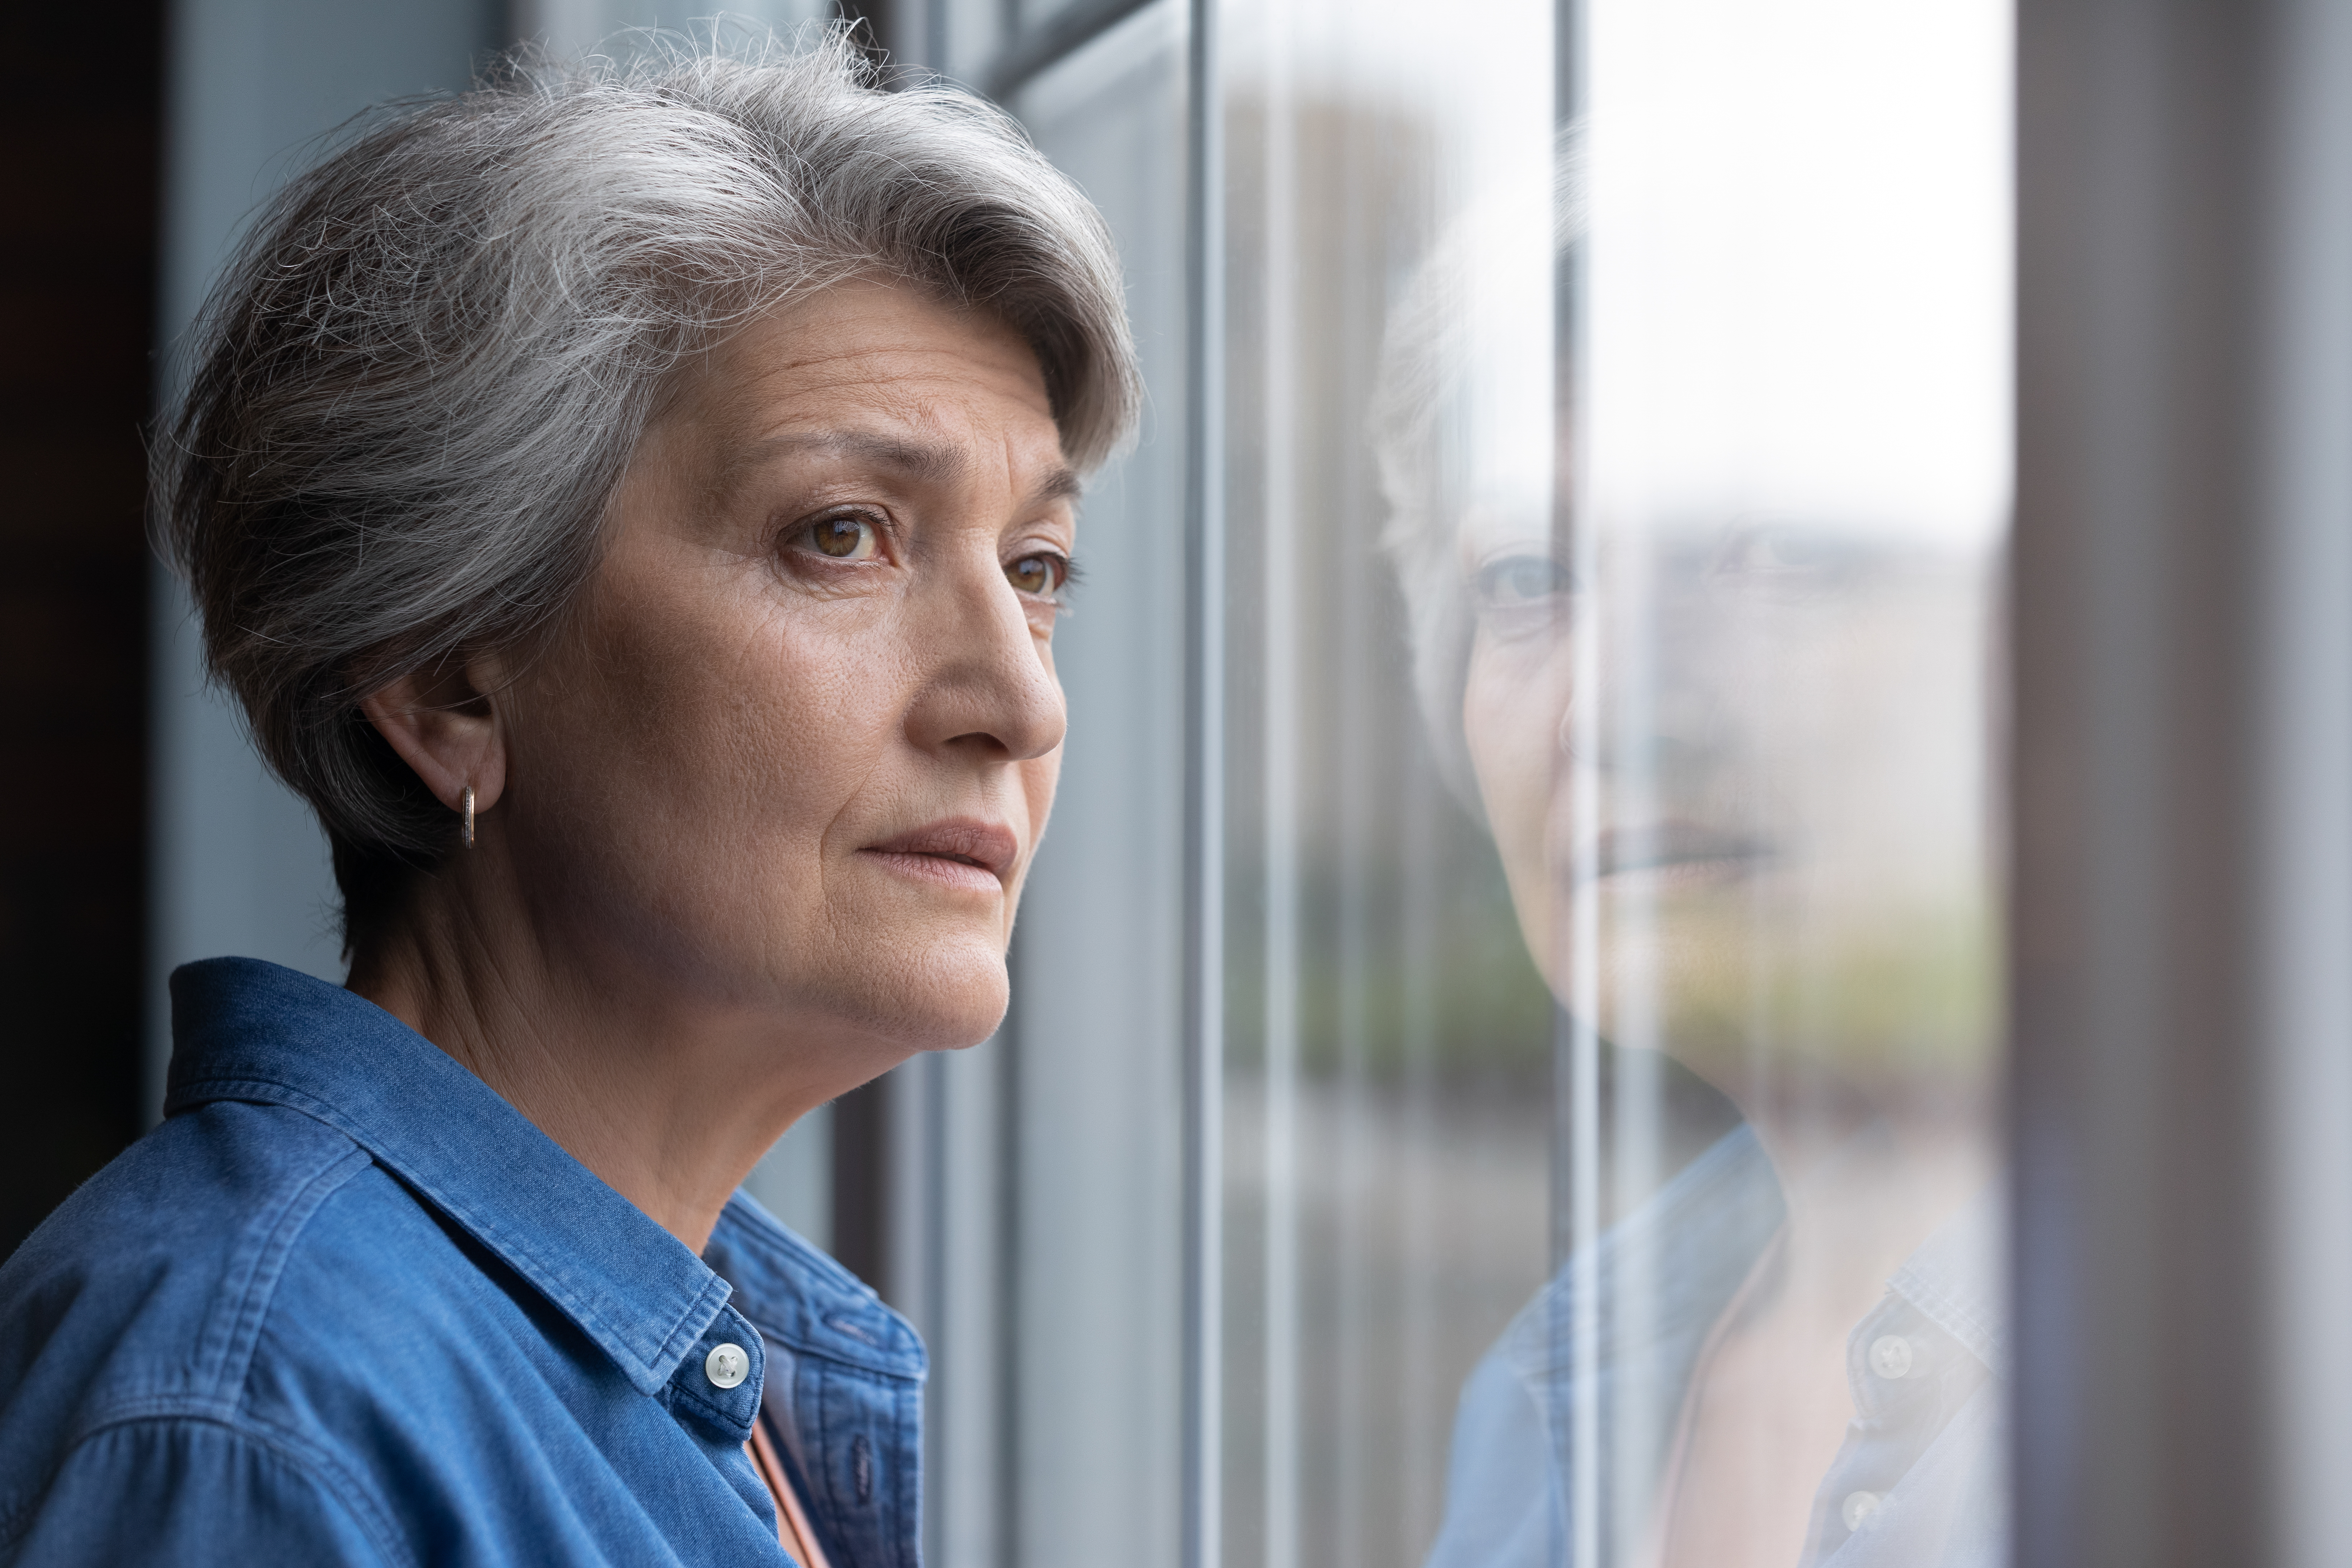 A woman looking out the window while contemplating something | Source: Shutterstock